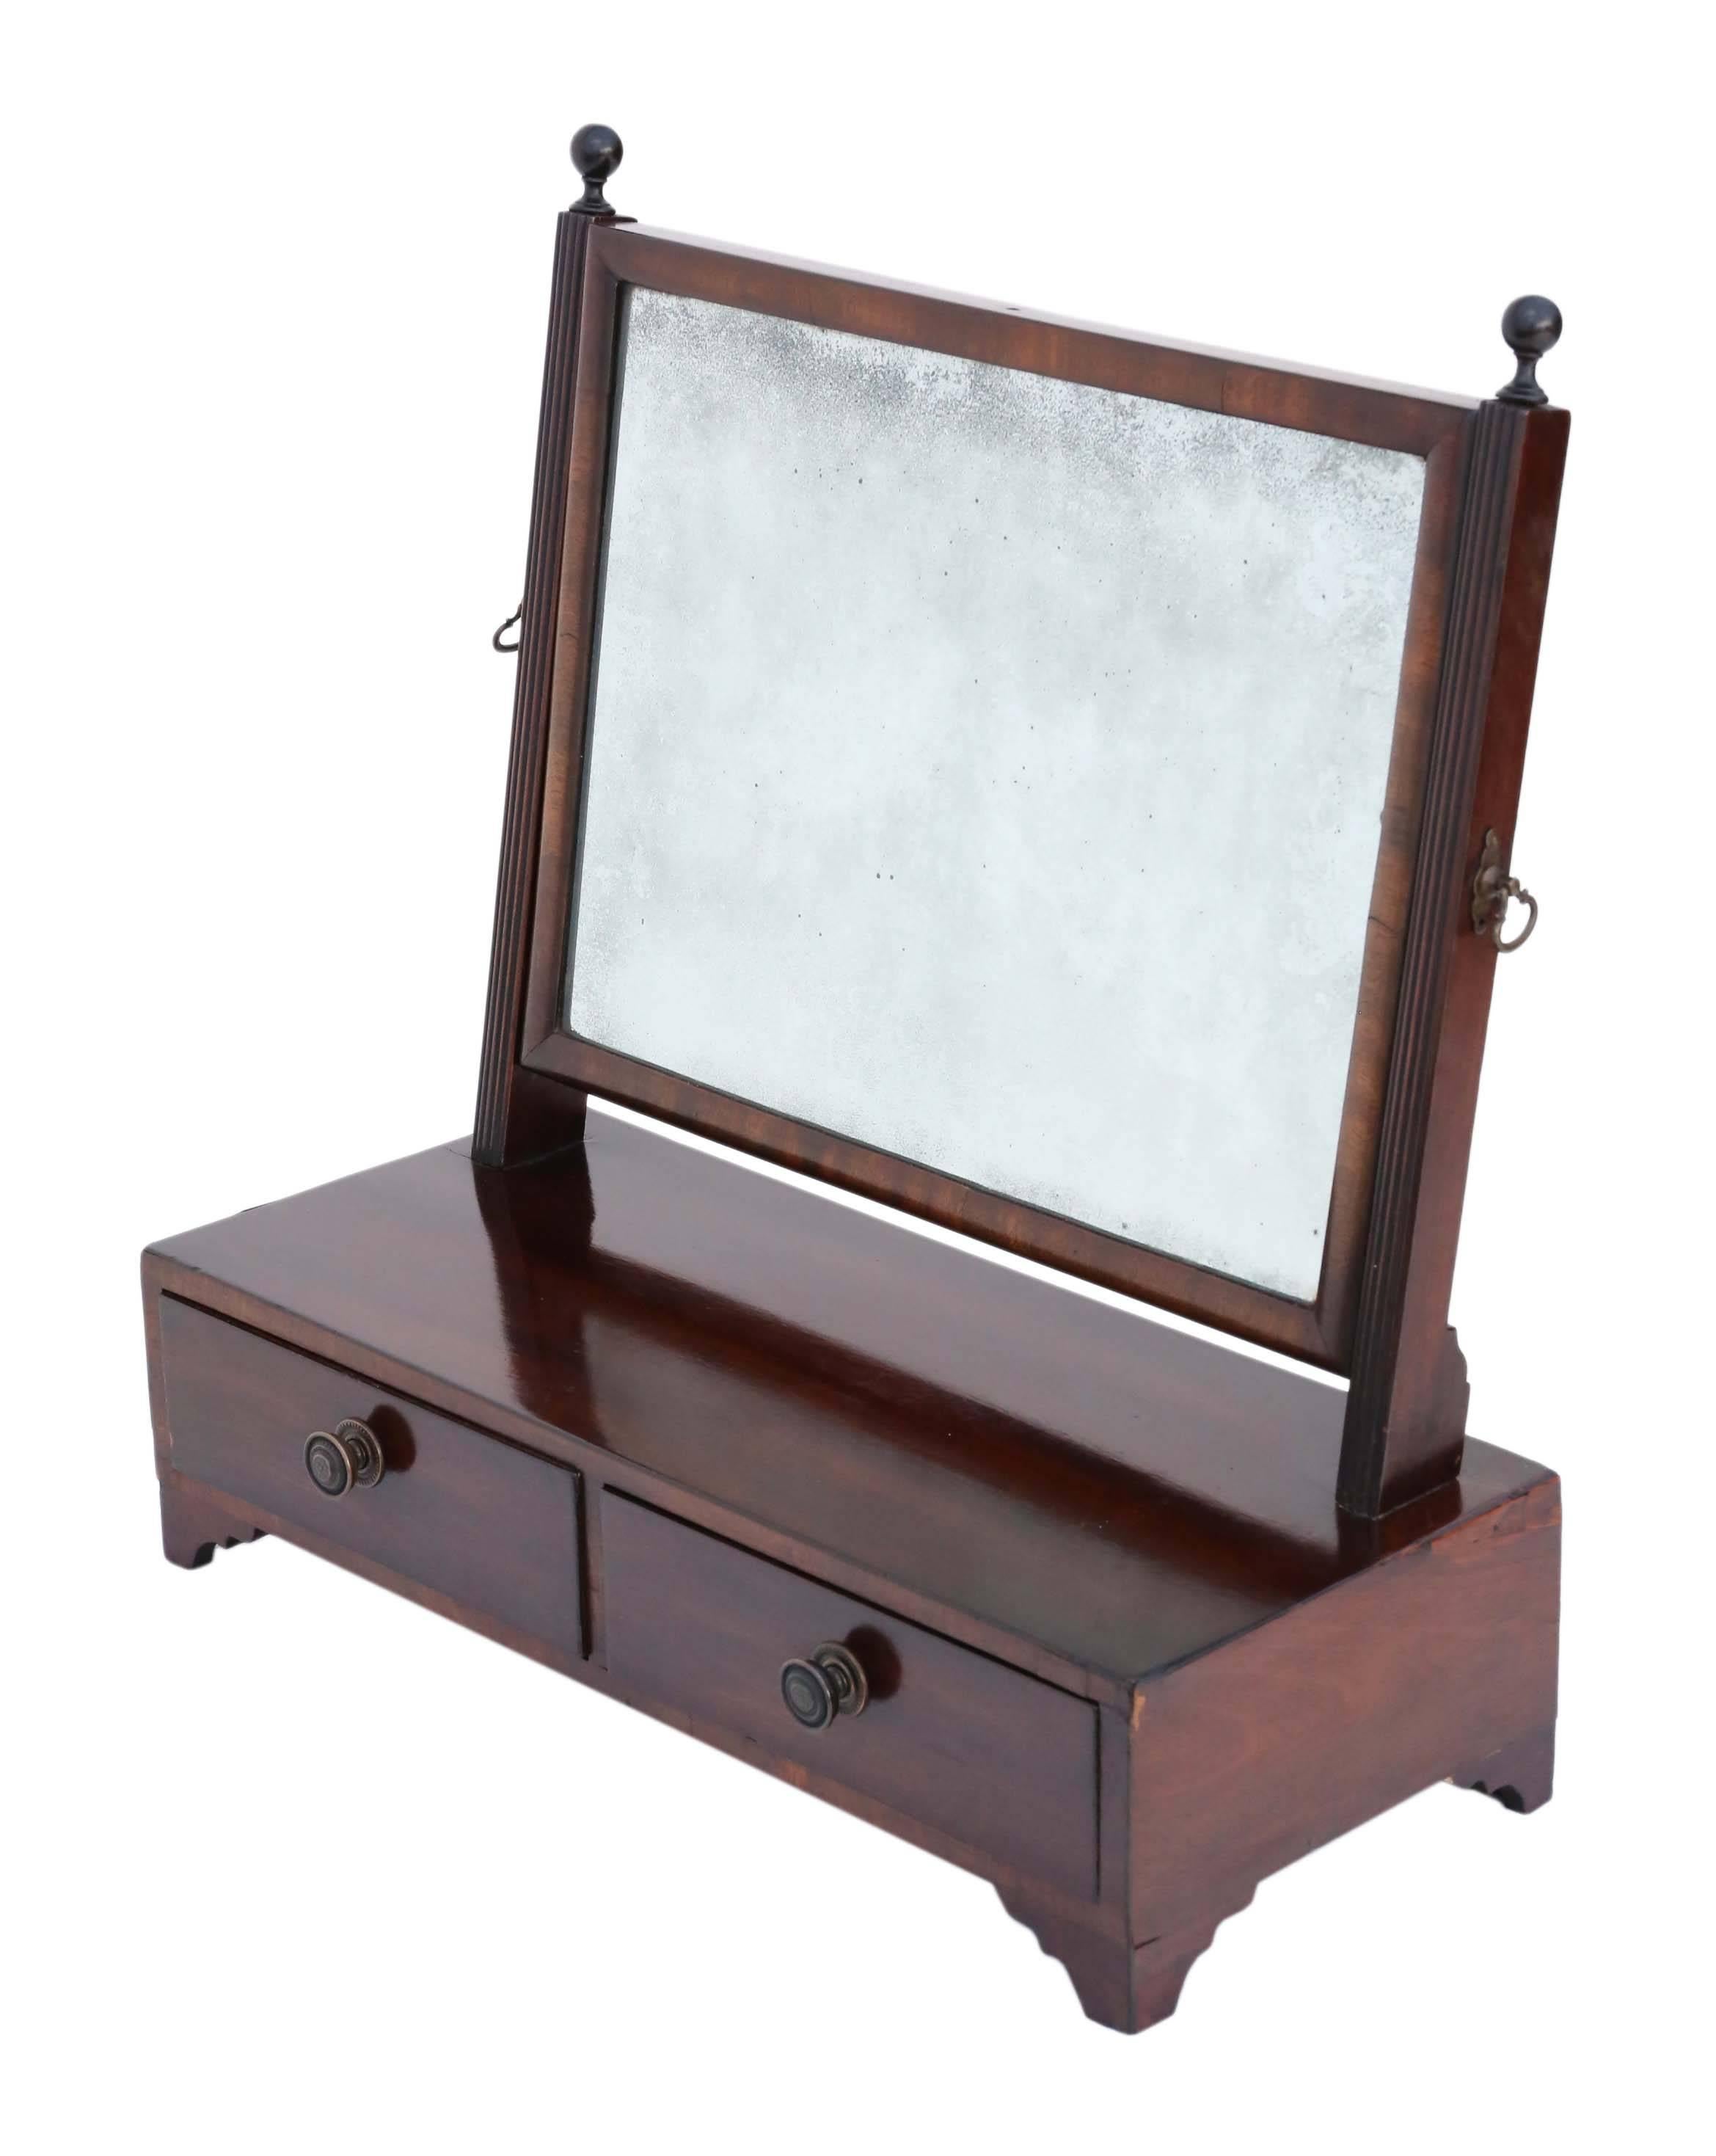 Antique Georgian mahogany swing dressing table or toilet mirror. Dates from the first half of the 19th century.

This is a lovely mirror, that is full of age and charm, with great proportions.

A rare find, that would look amazing in the right